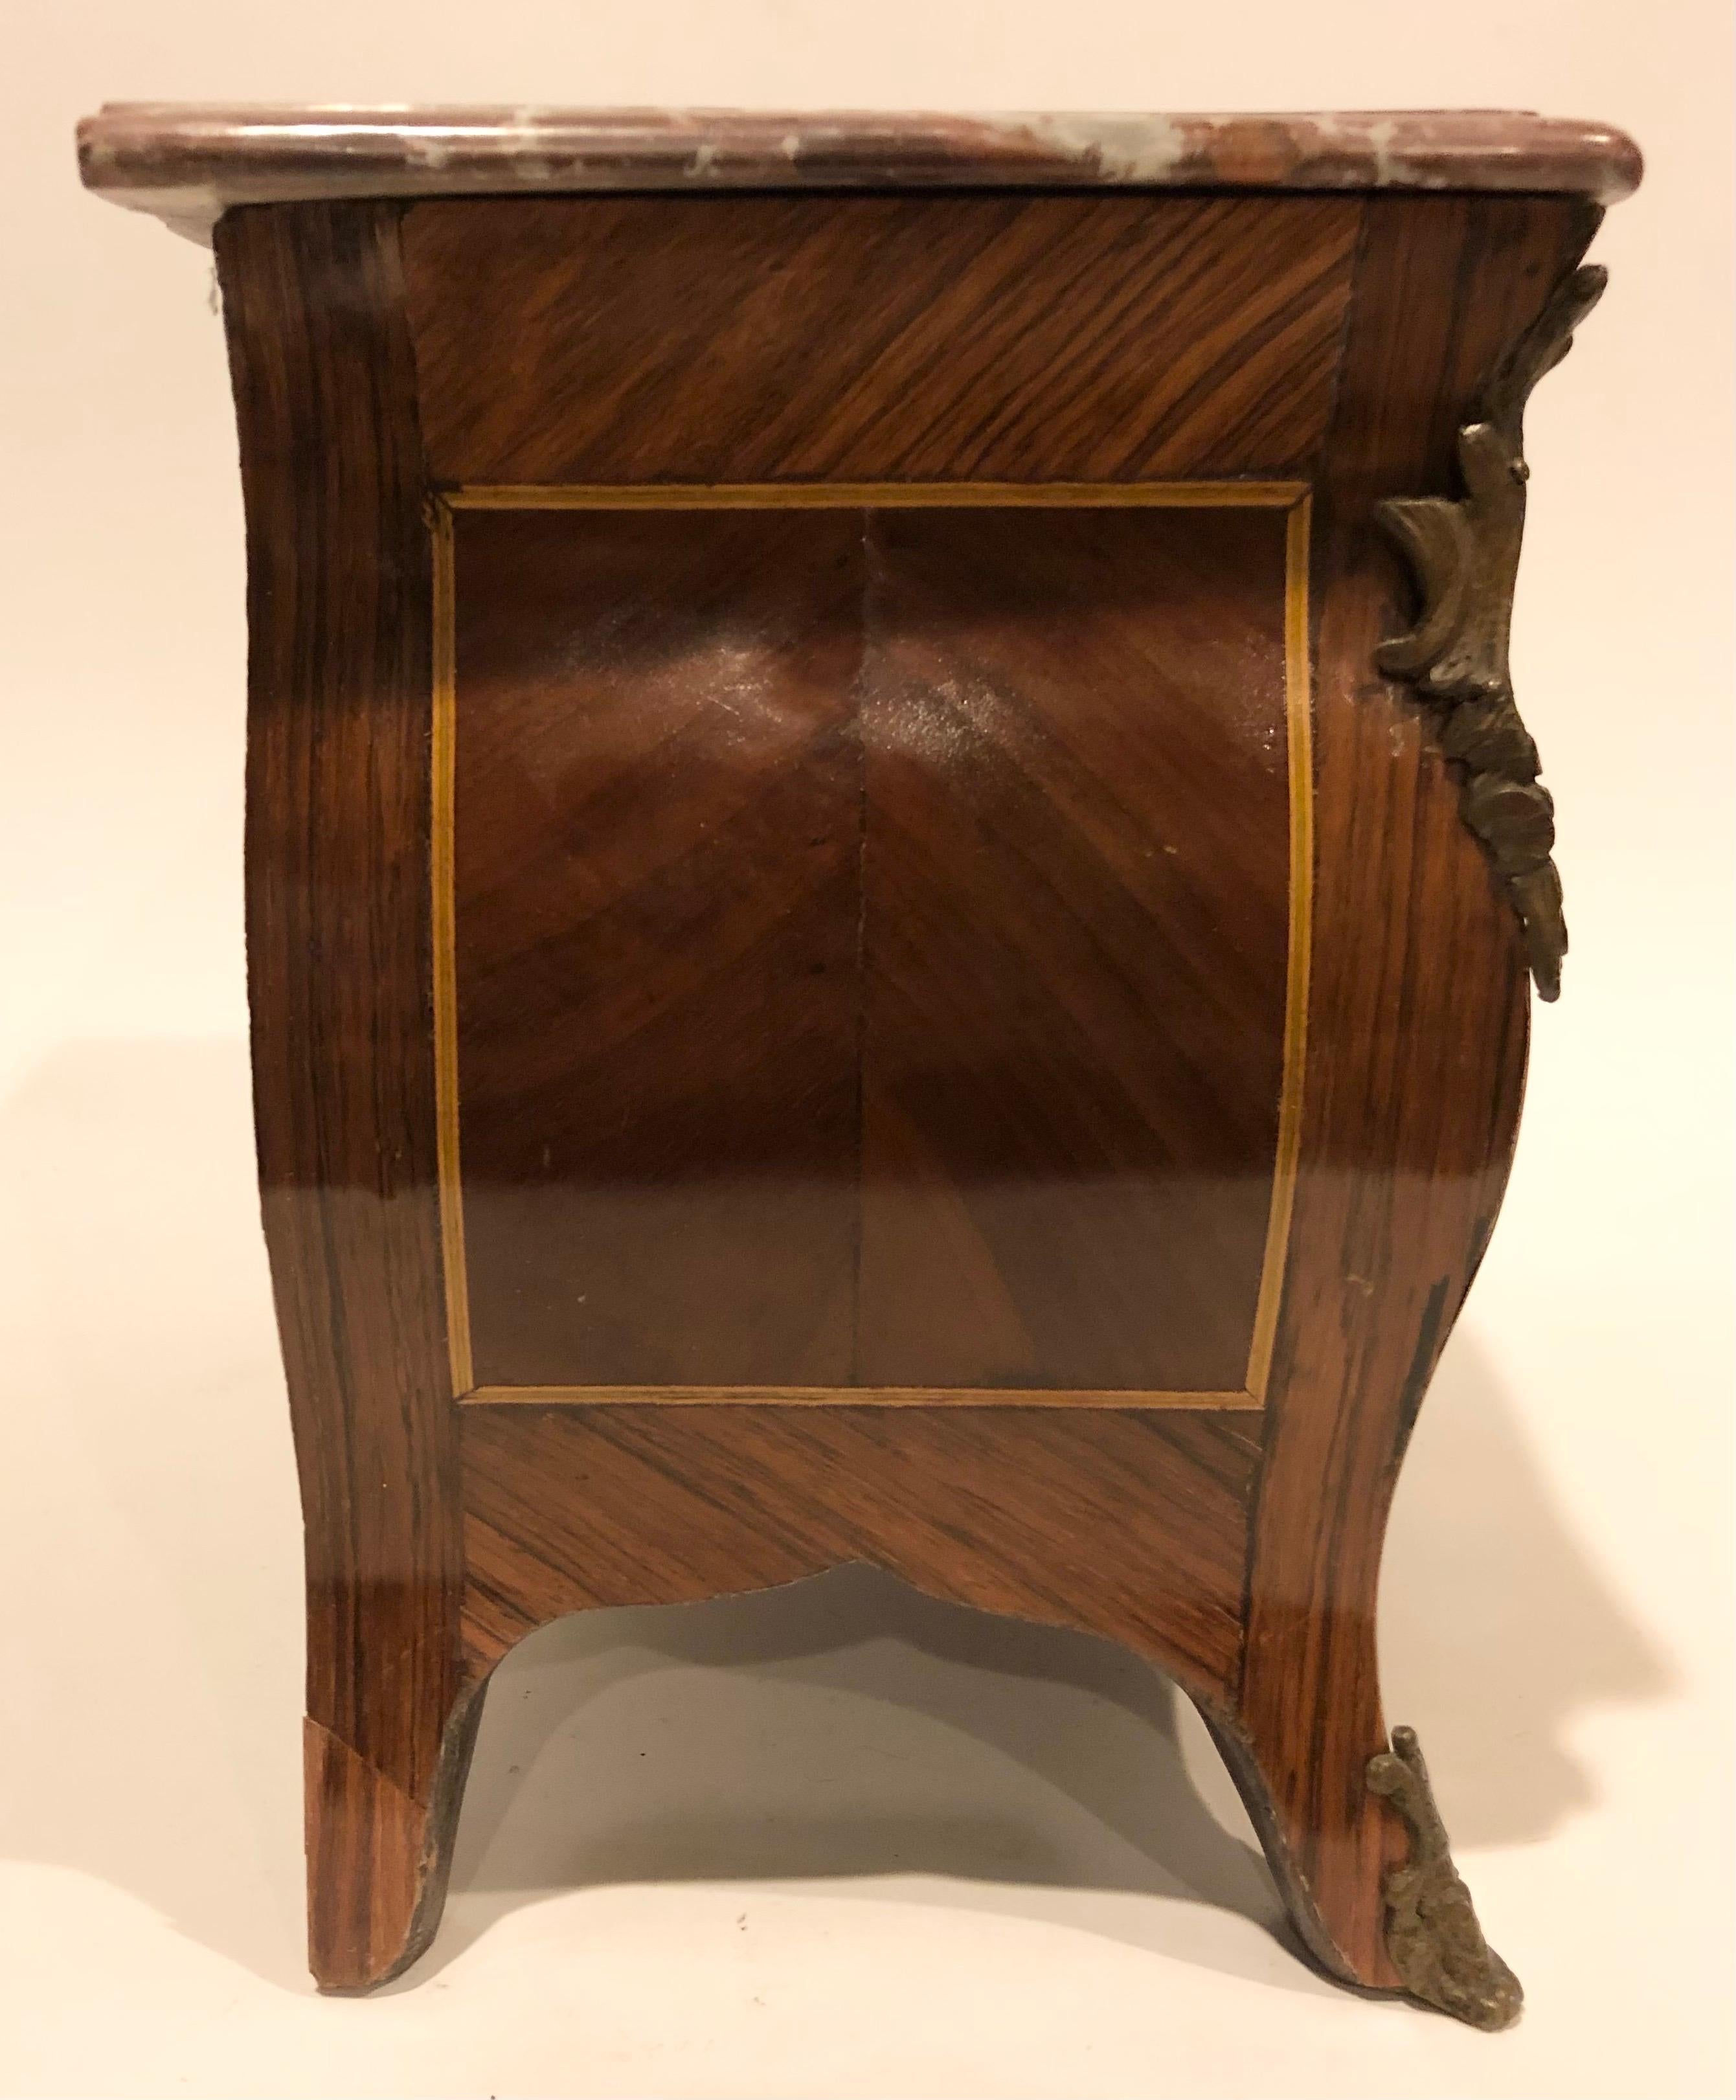 19th century French shaped miniature commode with wood inlays, bronze foliate accents and jasper red marble top. No key.